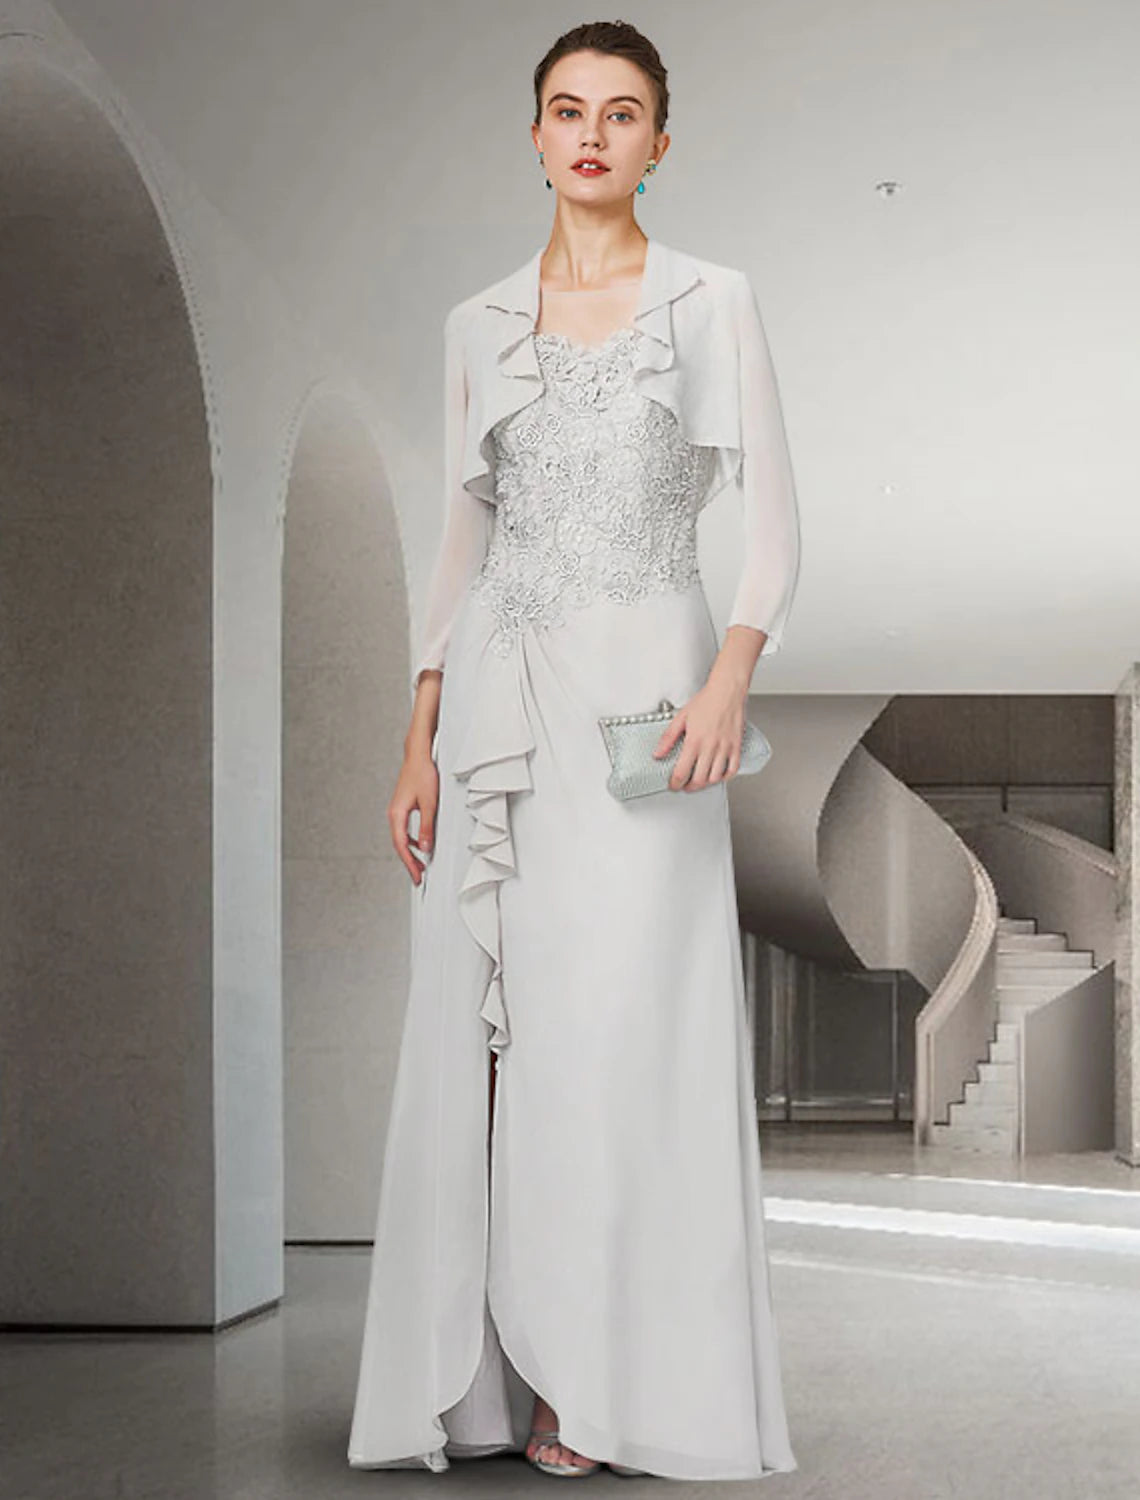 Two Piece Sheath / Column Mother of the Bride Dress Elegant Jewel Neck Floor Length Chiffon Lace 3/4 Length Sleeve Wrap Included with Ruffles Appliques